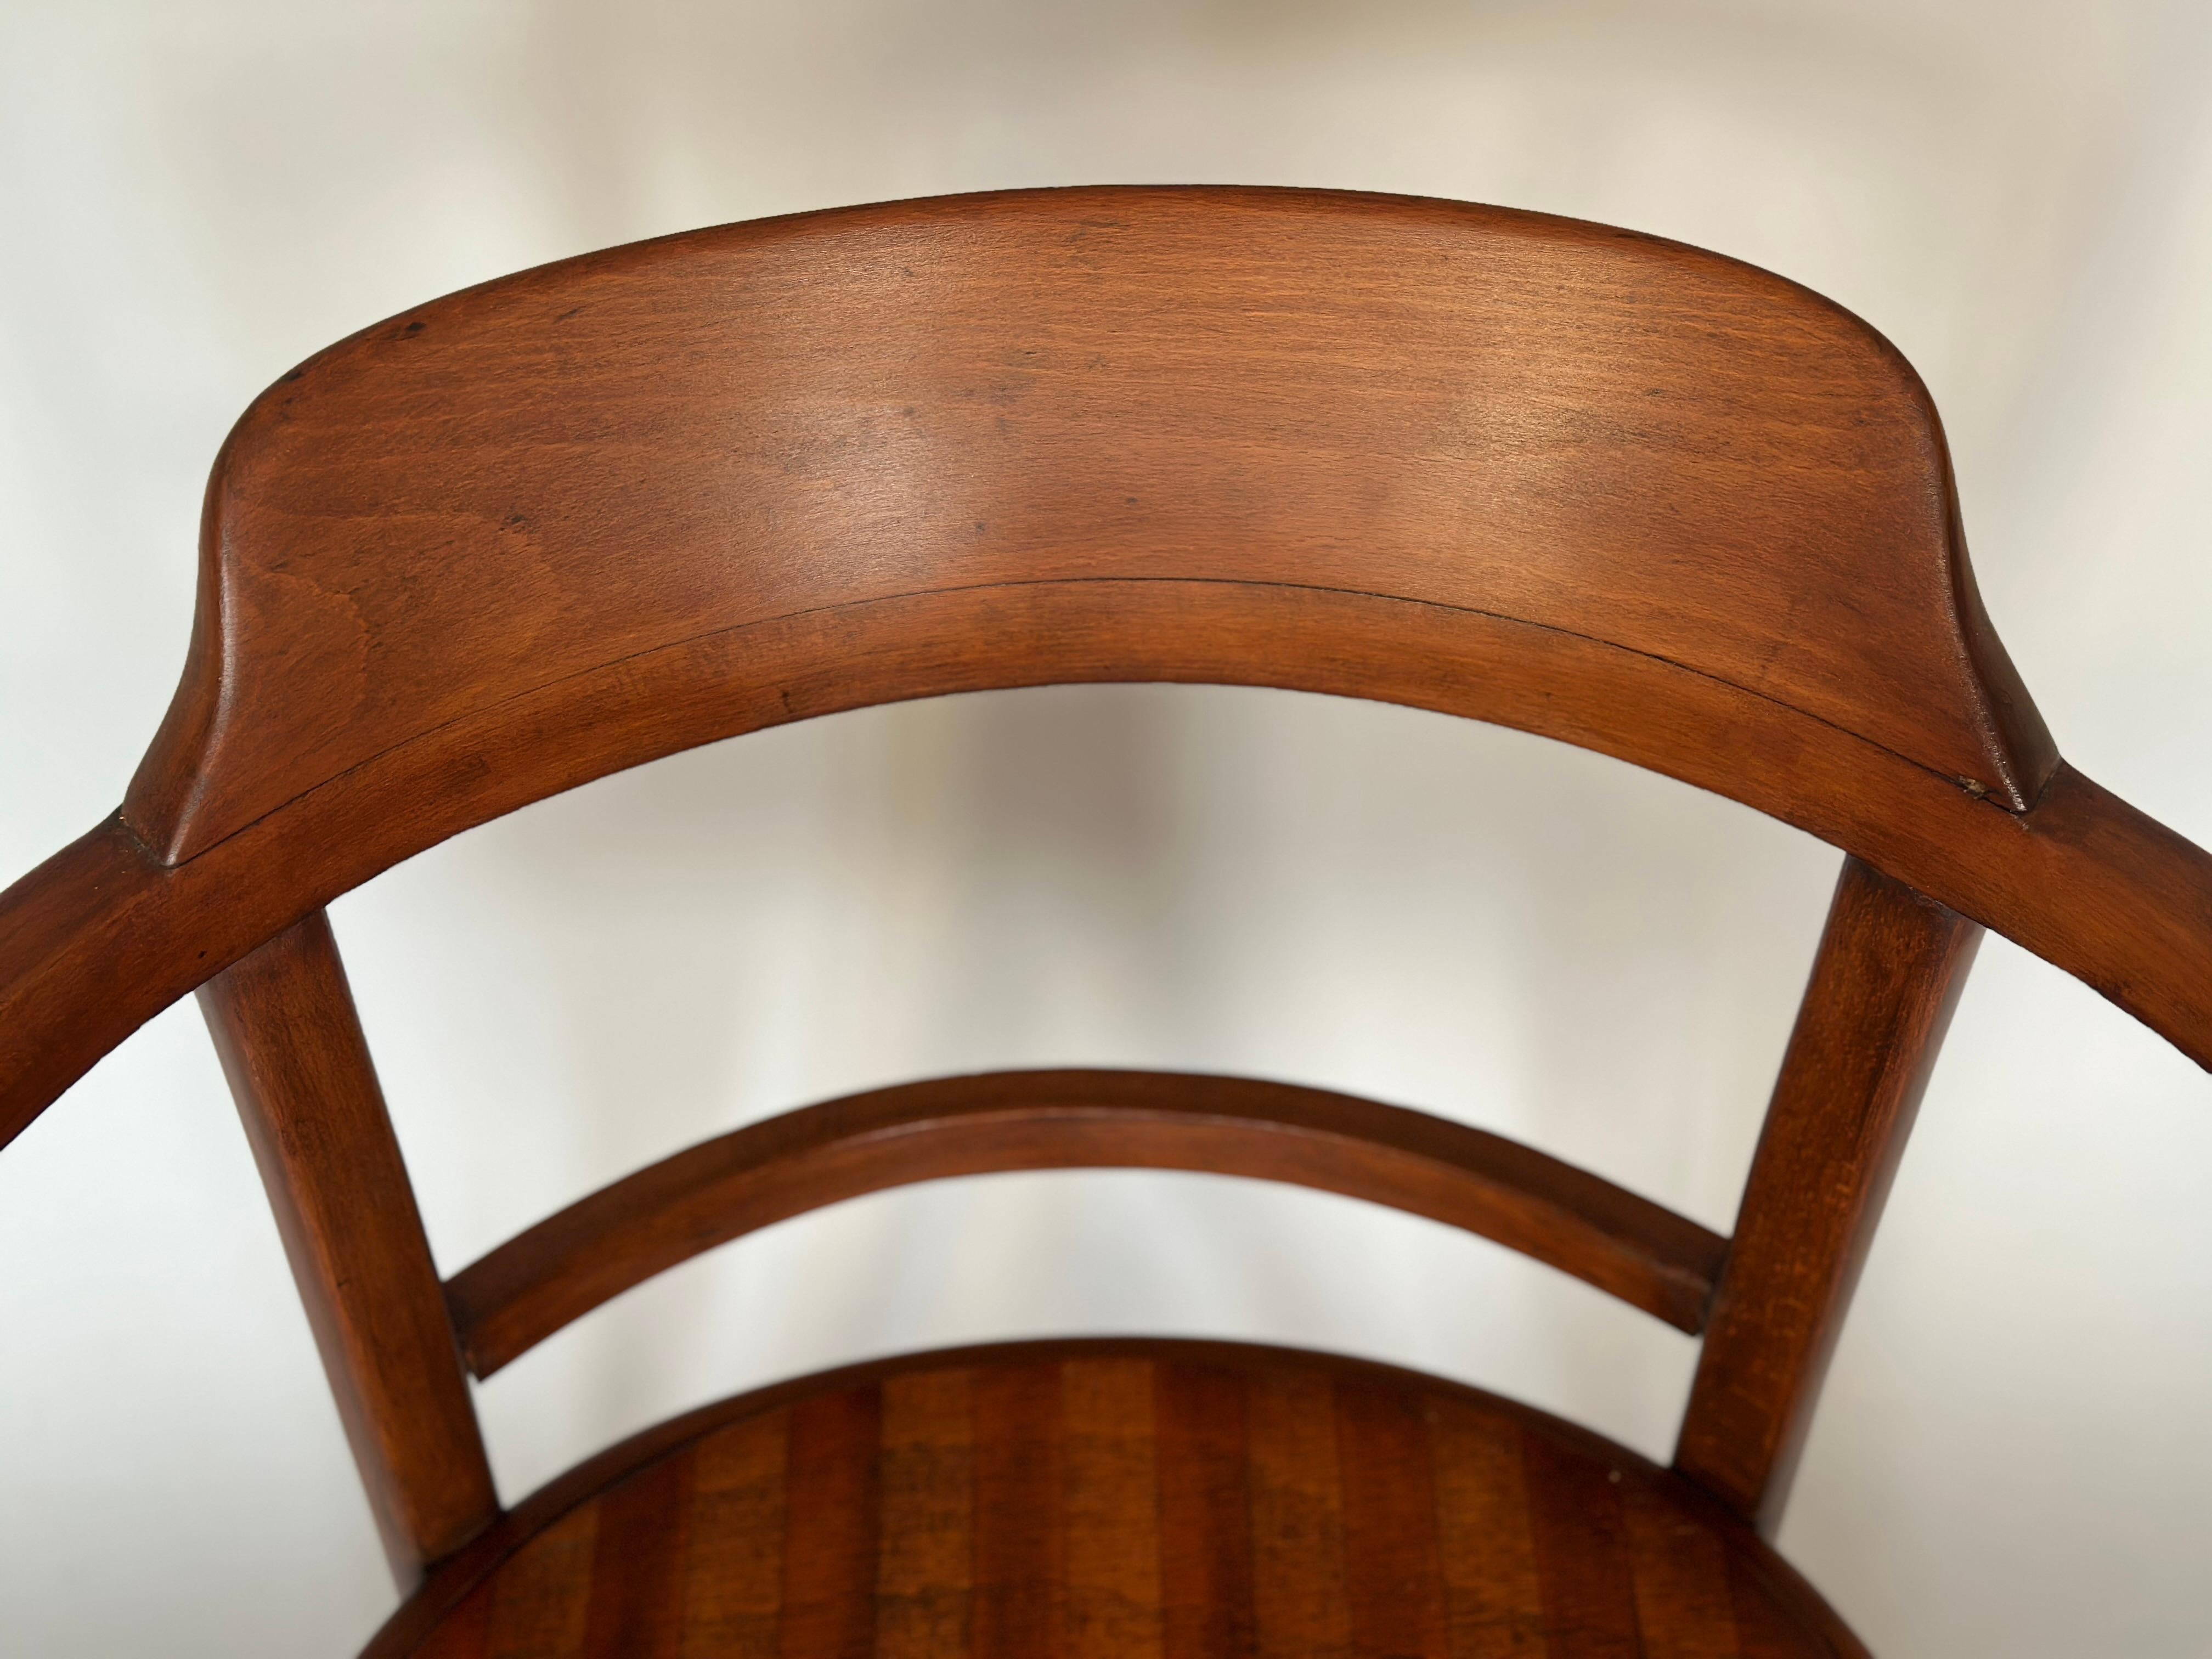 Austrian J & J Kohn Chair 714 by Otto Wagner, 1920s For Sale